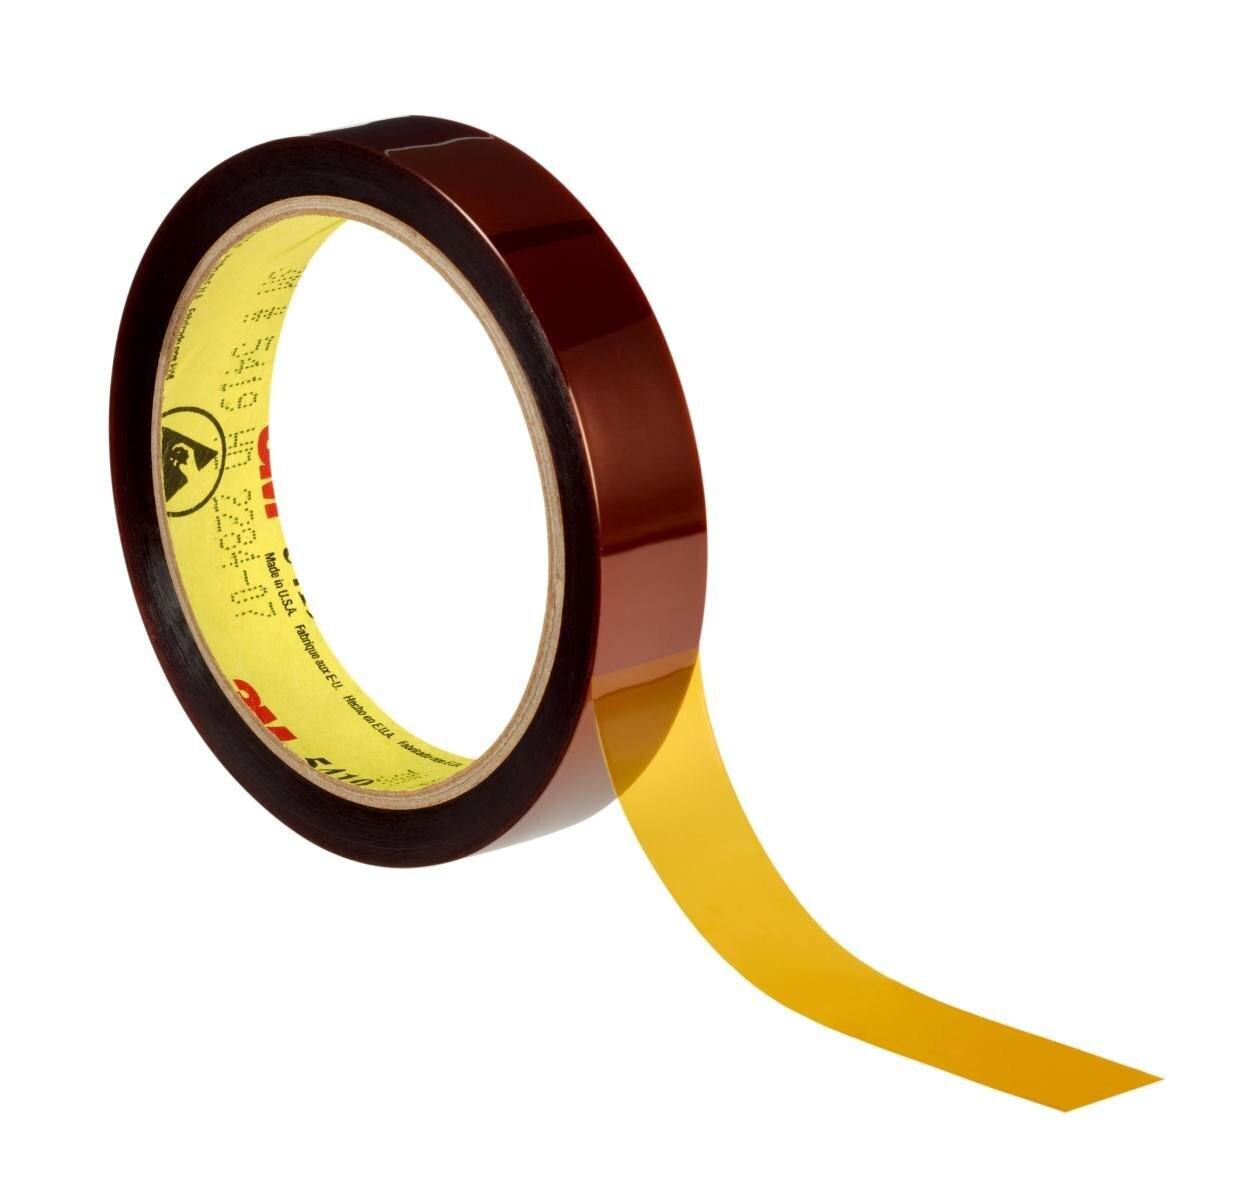 3M high temperature polyimide adhesive tape 5419, brown, 19 mm x 33 m, 68.58 µm